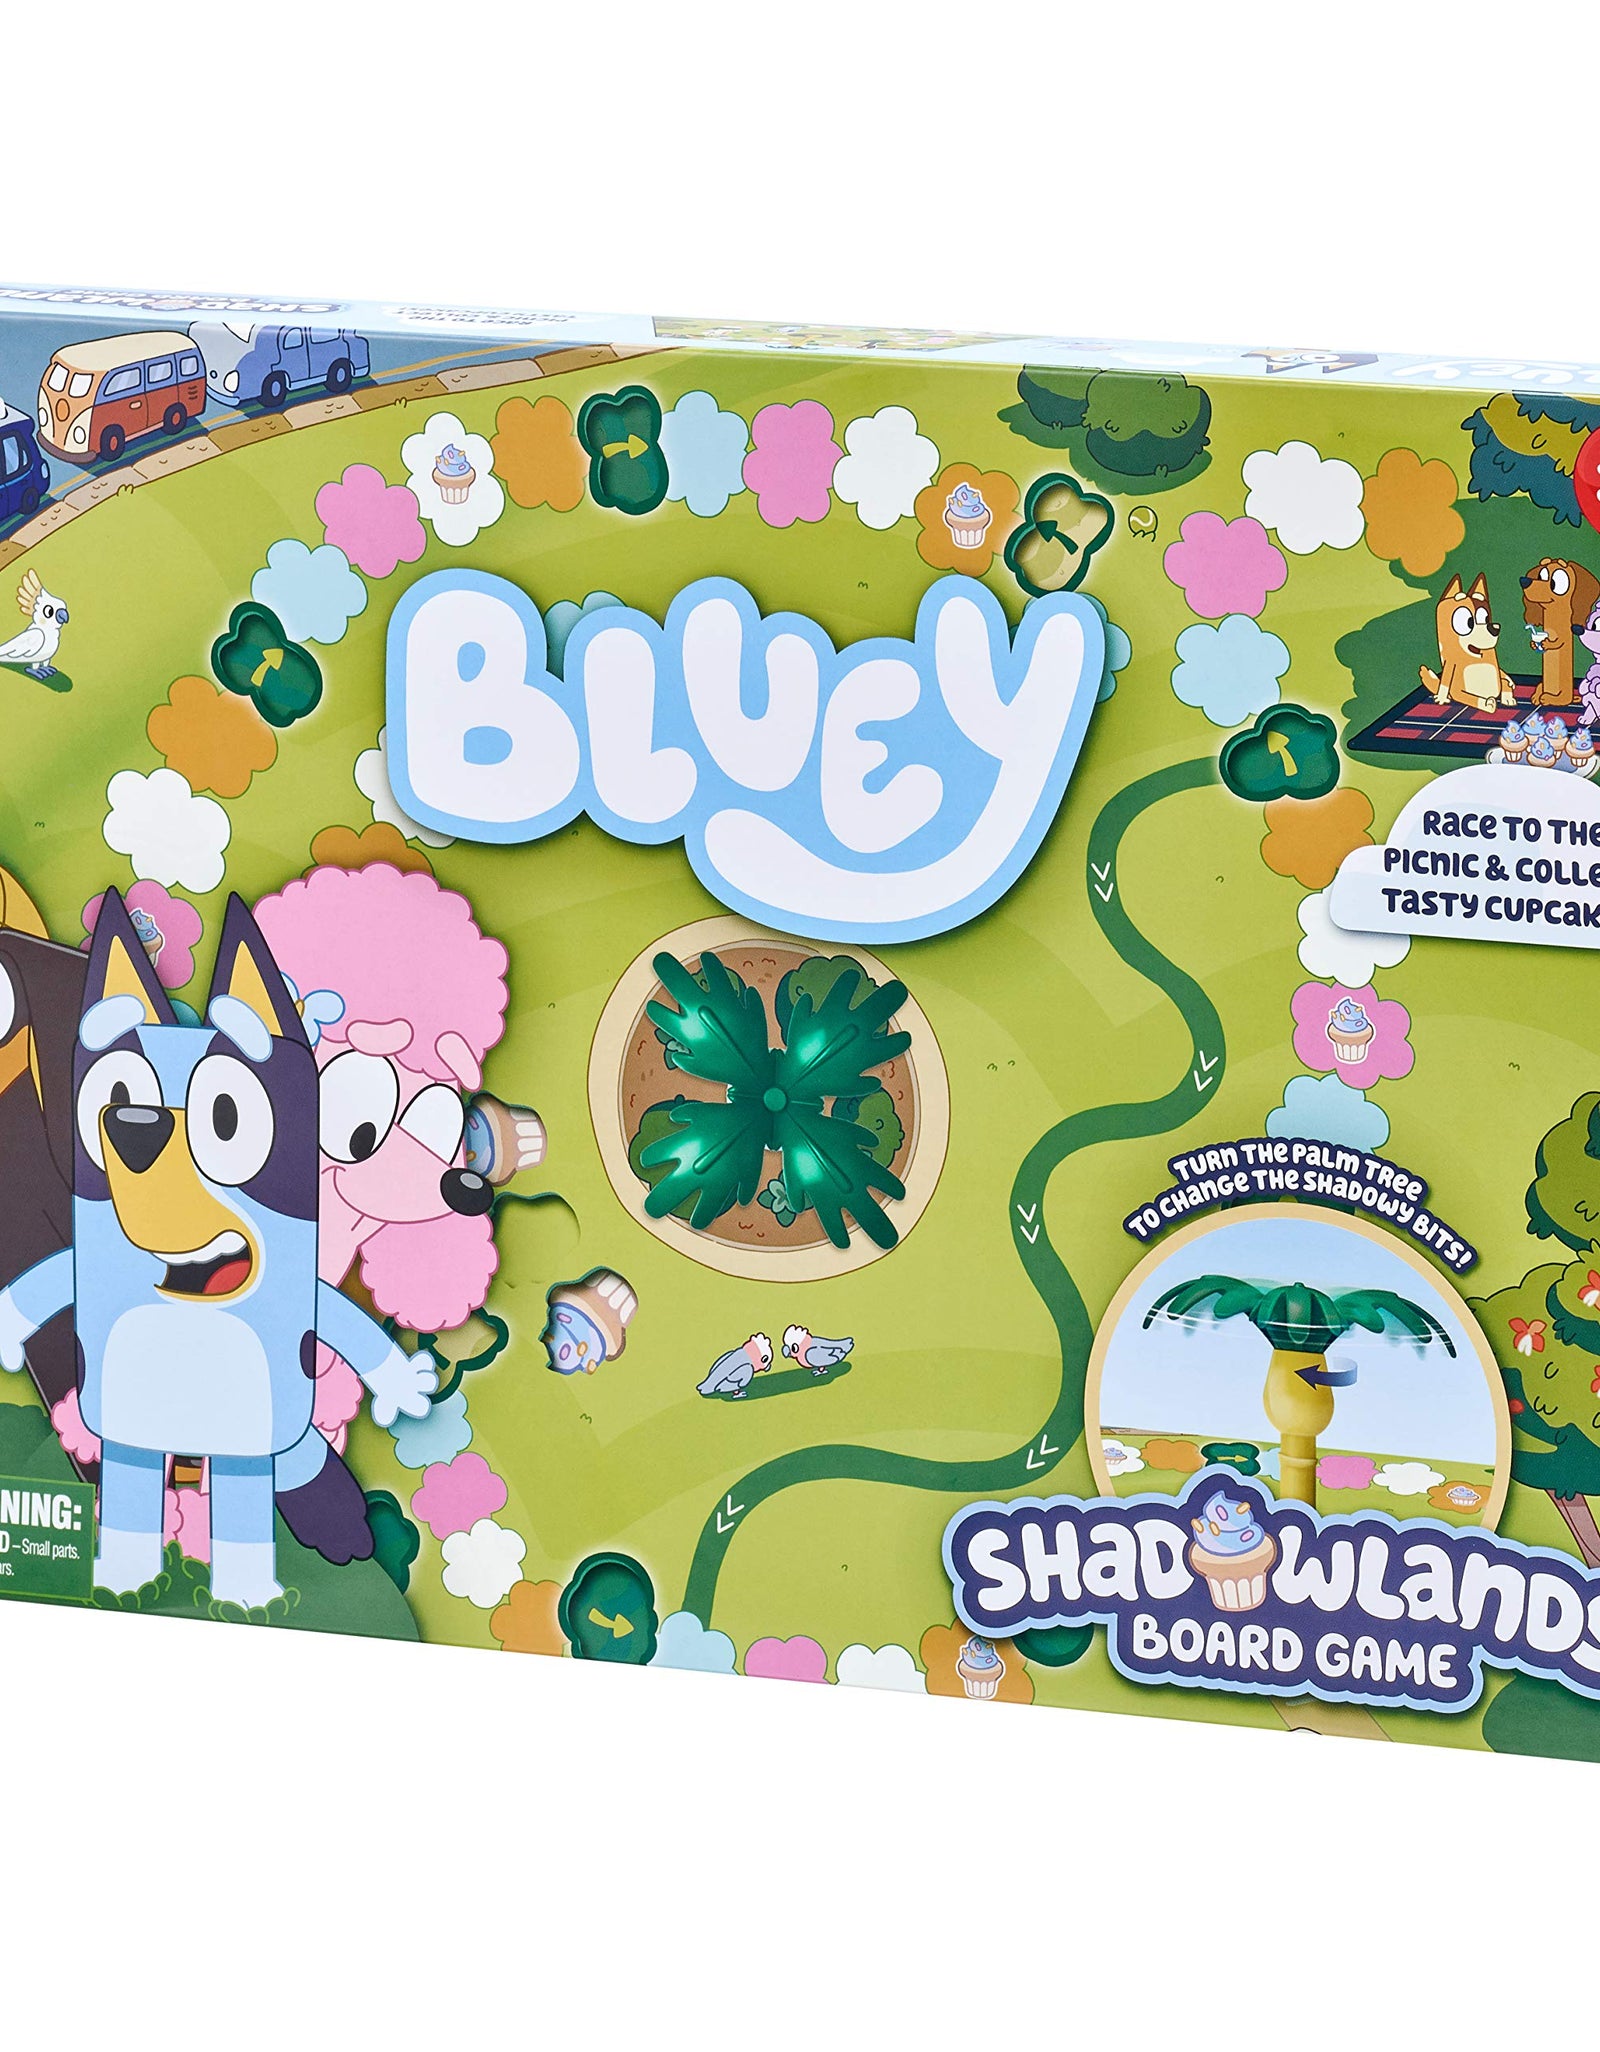 Bluey - Shadowlands Board Game - Family Game Night, Unpredictable Fun - Engaging Fun for All - Collect All 5 Cupcake Cards | 2-4 Players | for Ages 3+, Multicolor, 13011